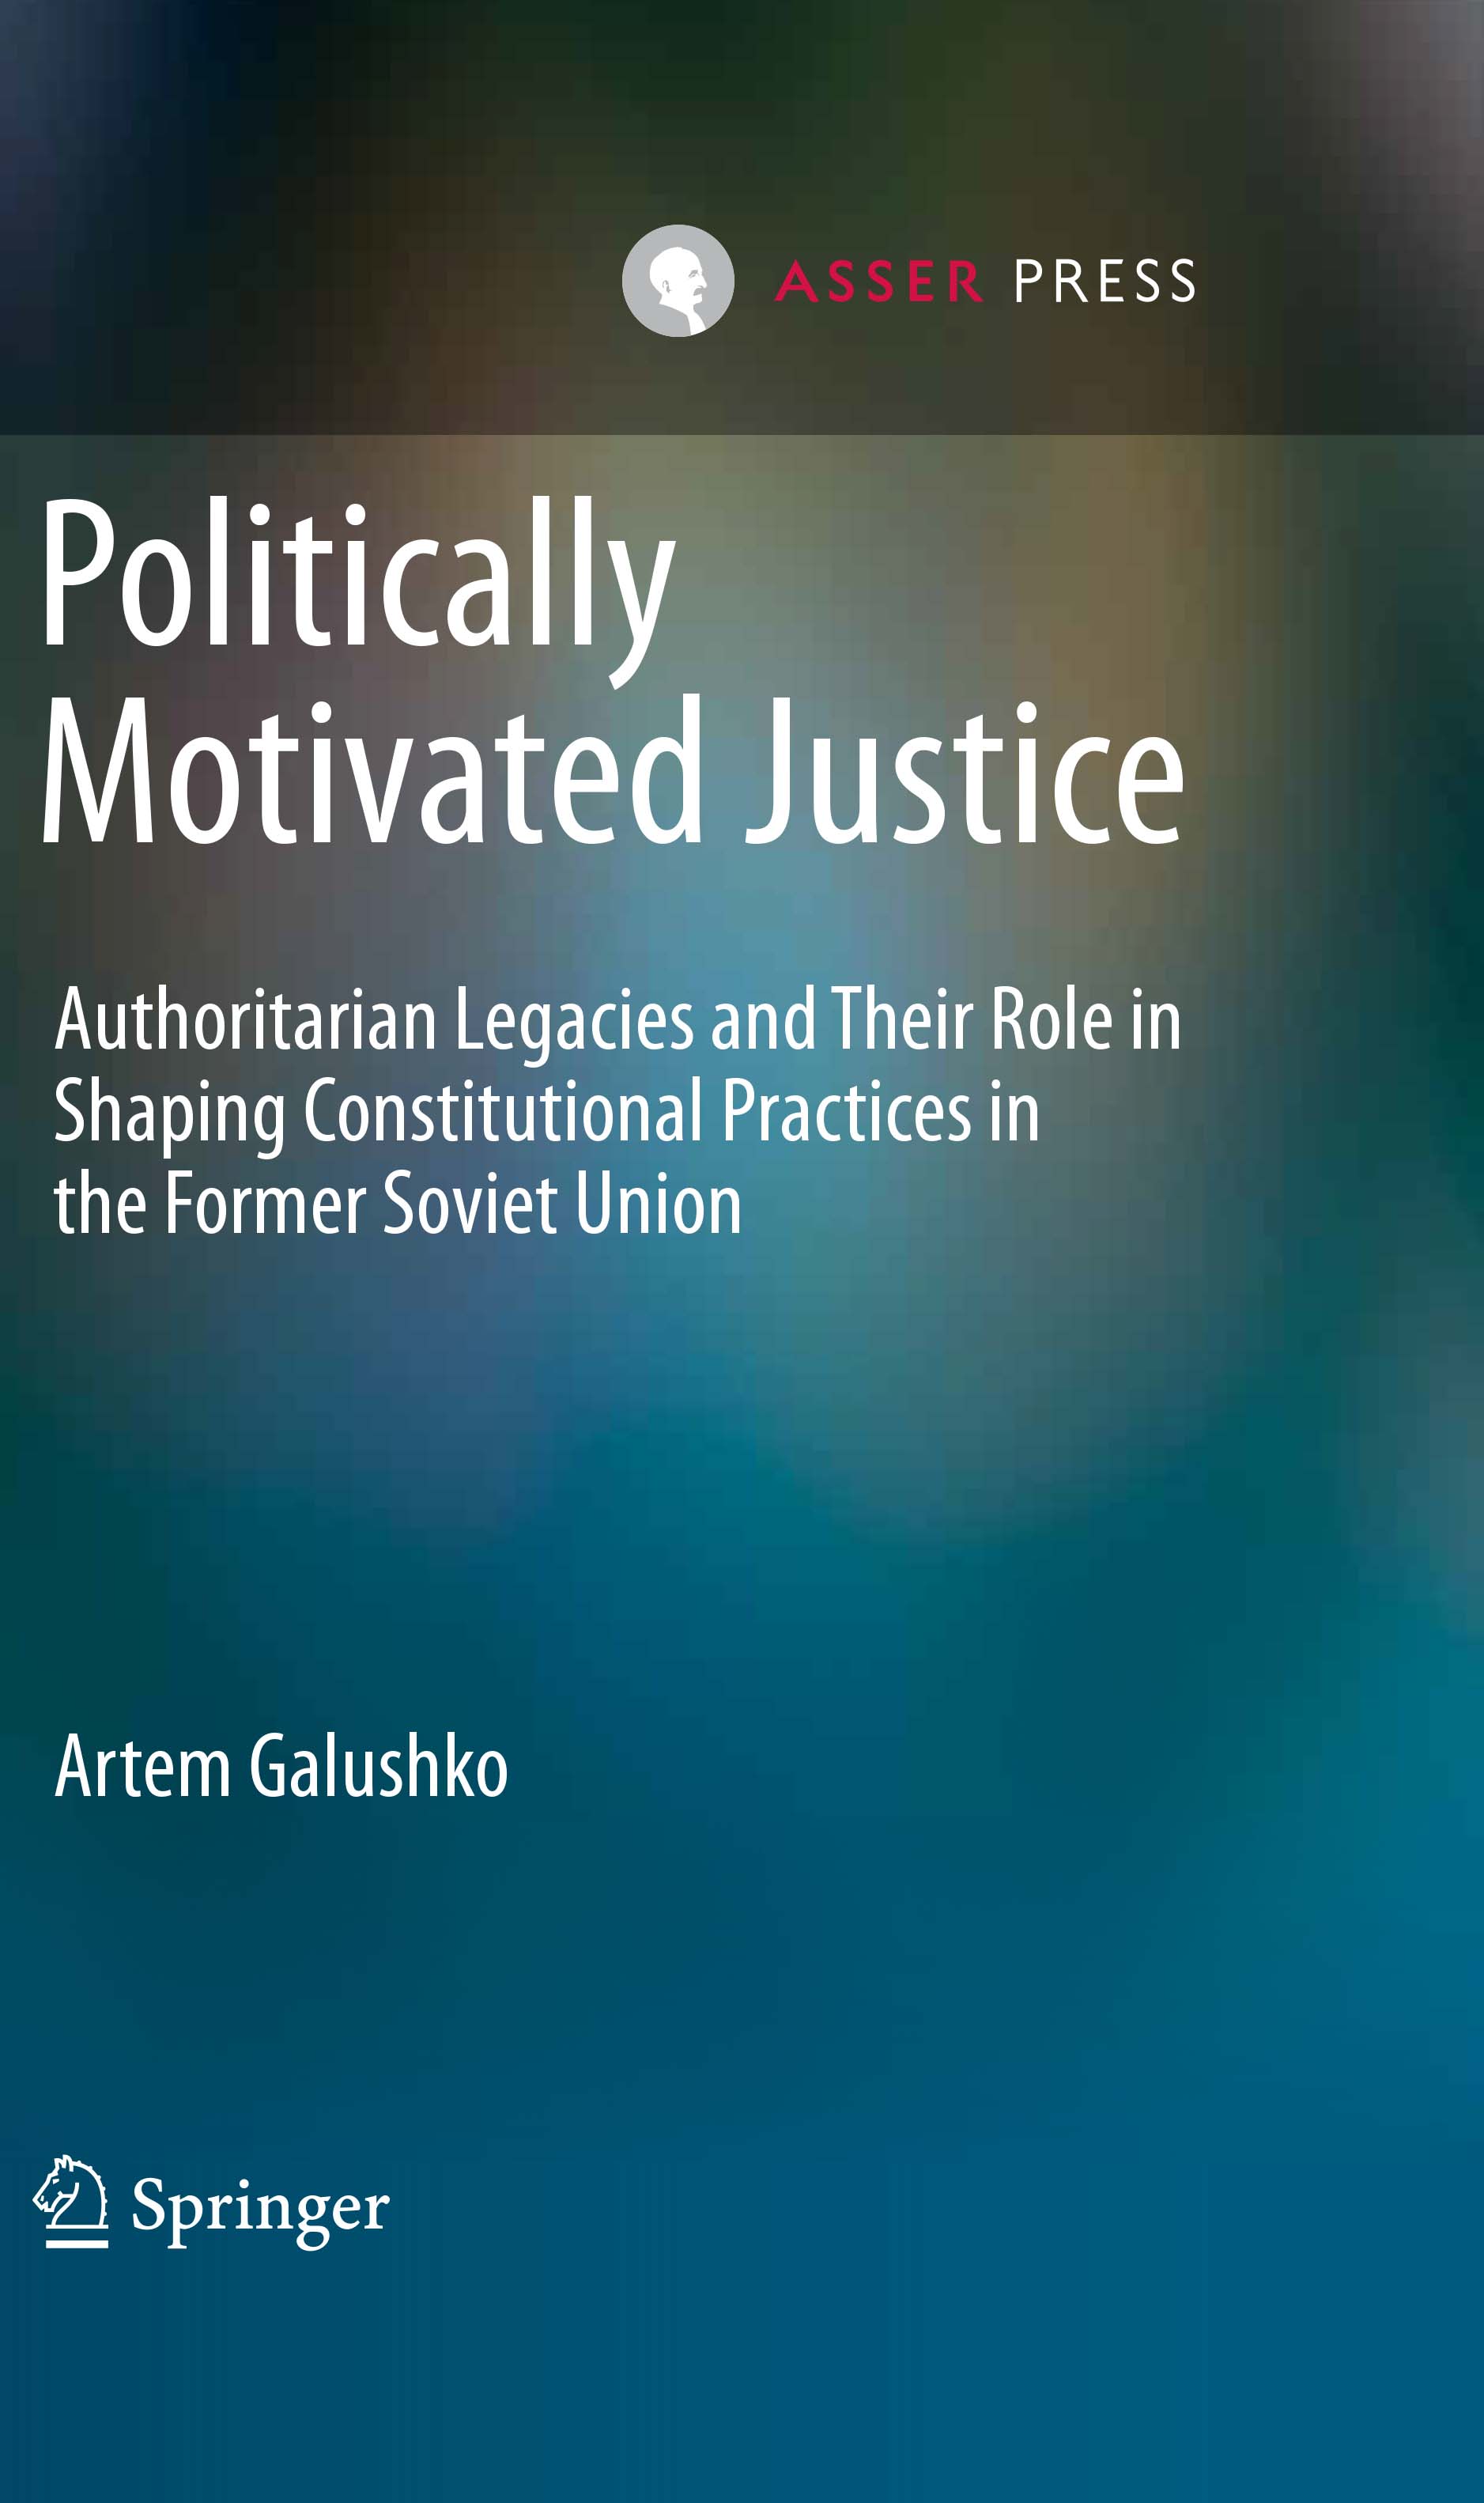 Politically Motivated Justice - Authoritarian Legacies and their Role in Shaping Constitutional Practices in the Former Soviet Union